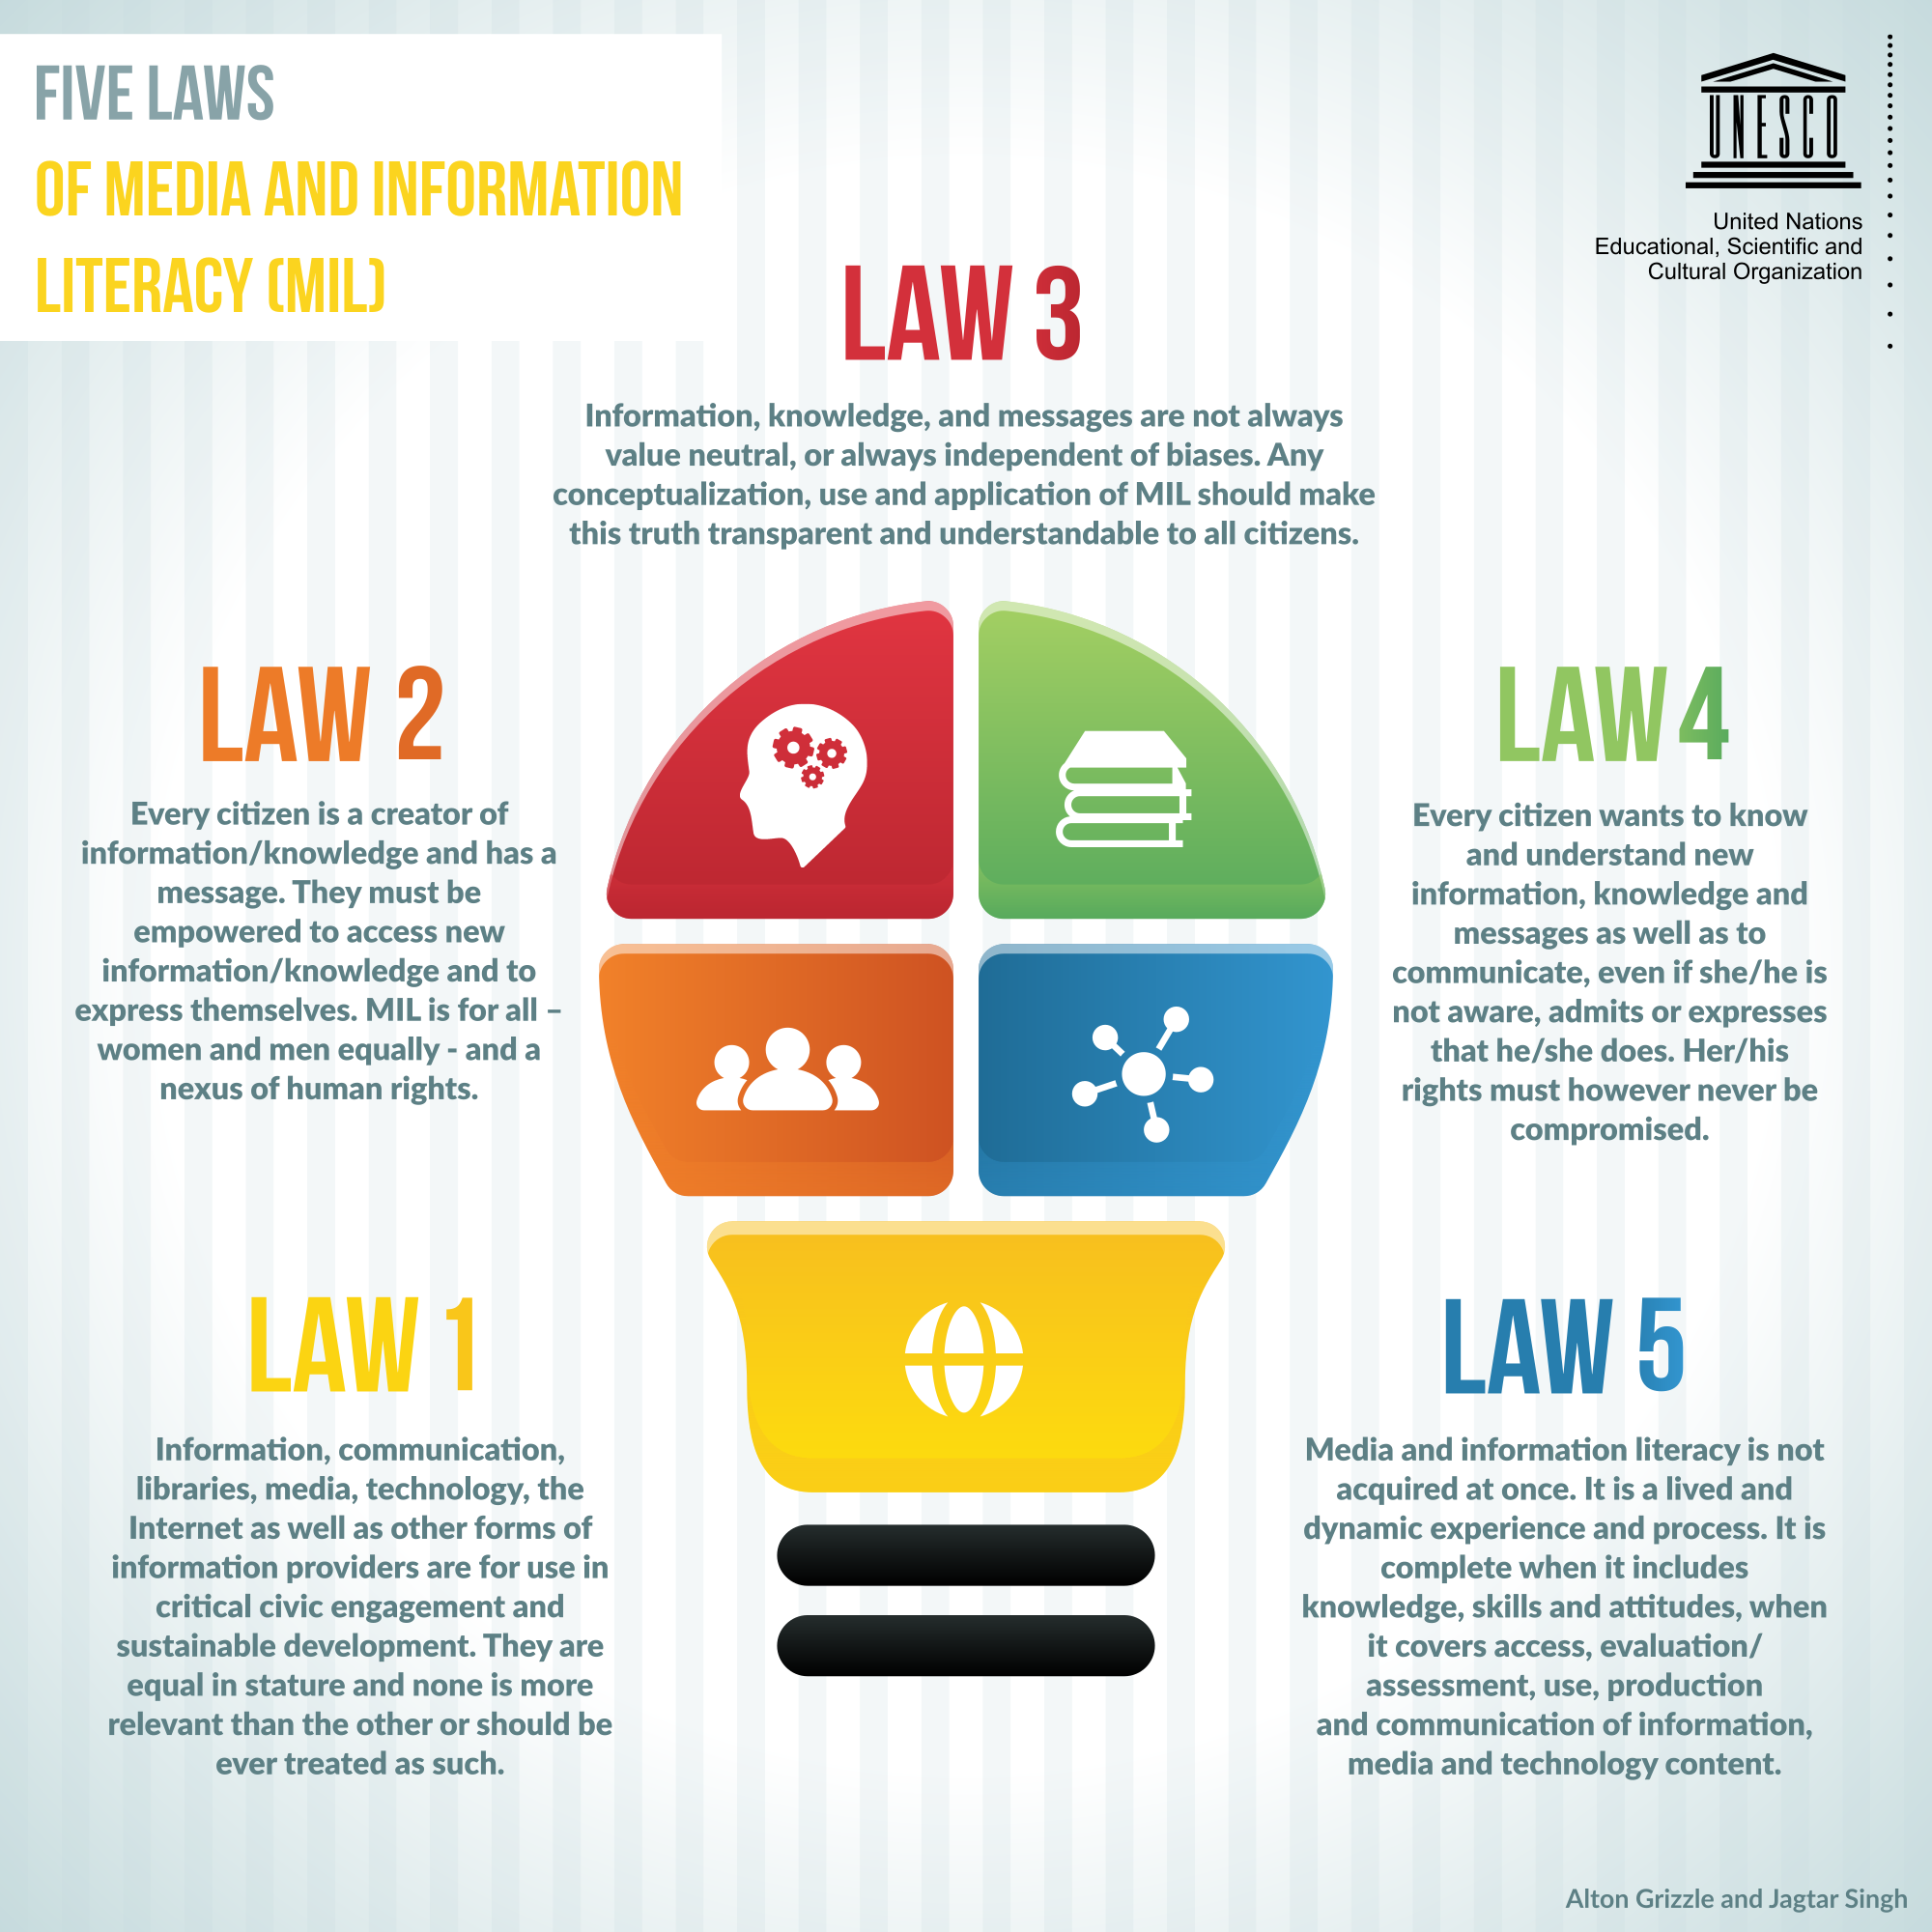 UNESCO launches Five Laws of Media and Information Literacy